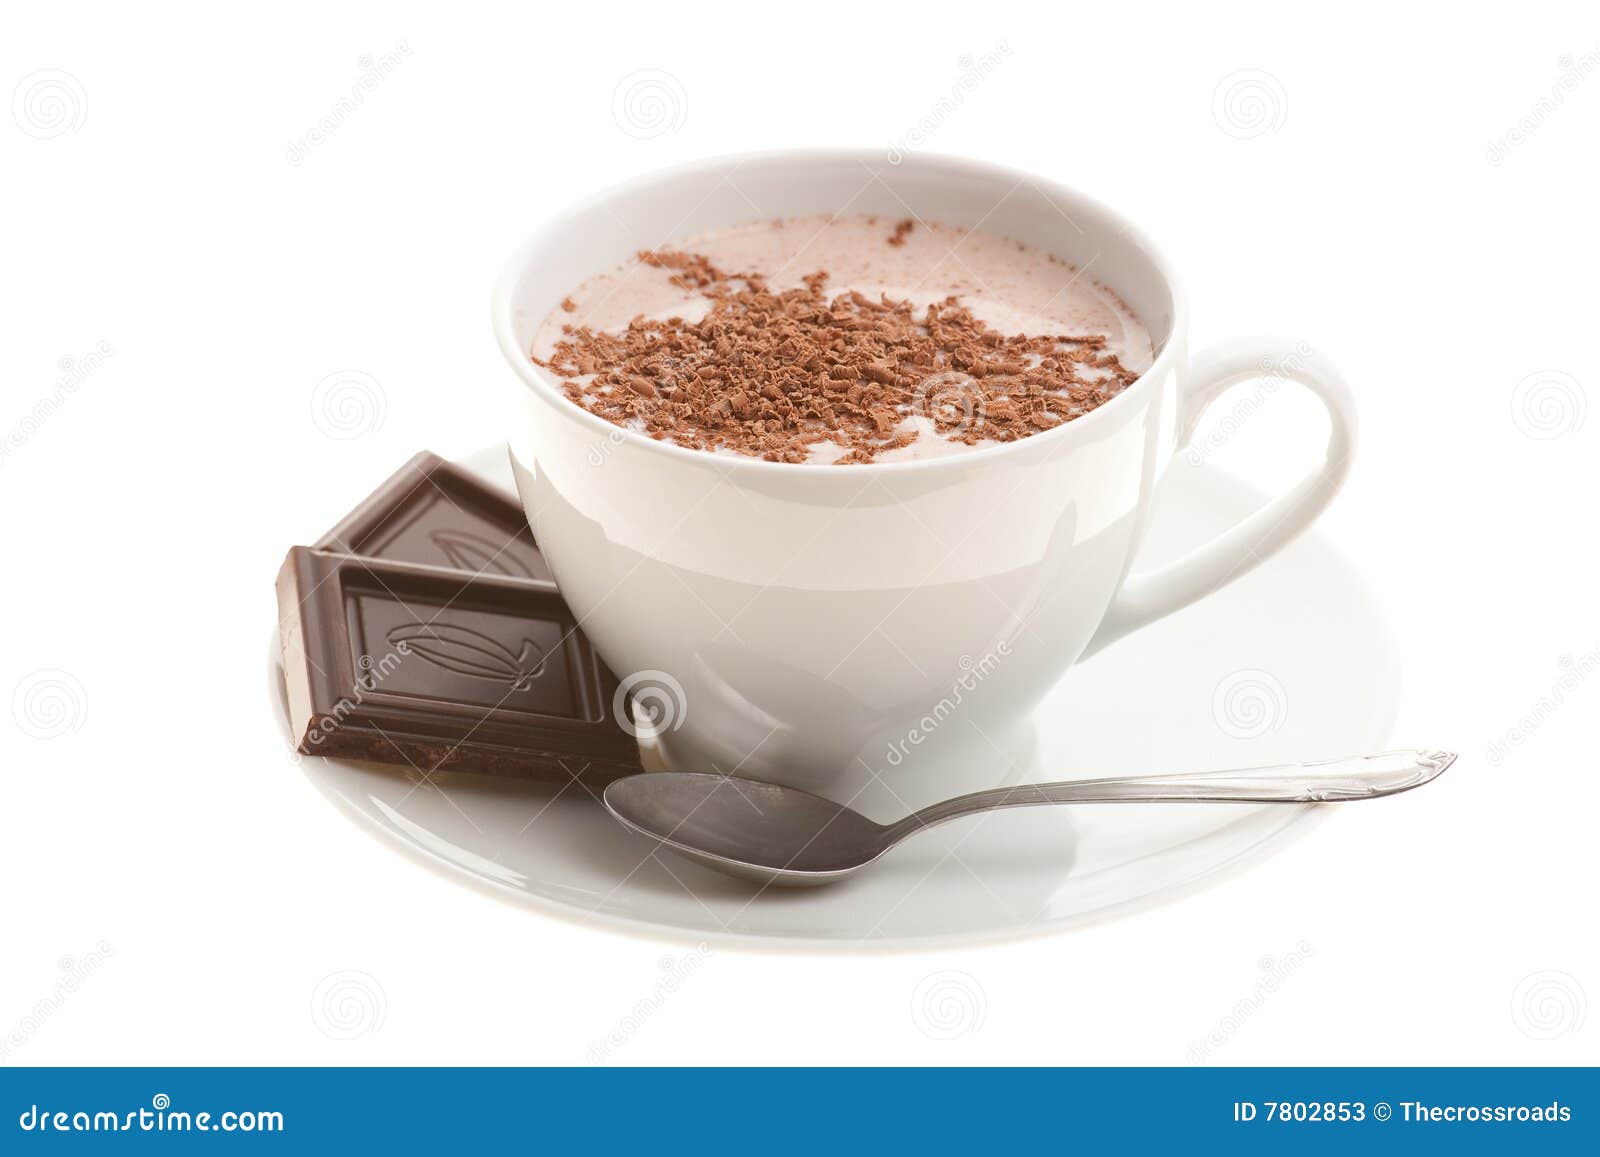 cup of hot chocolate with a spoon